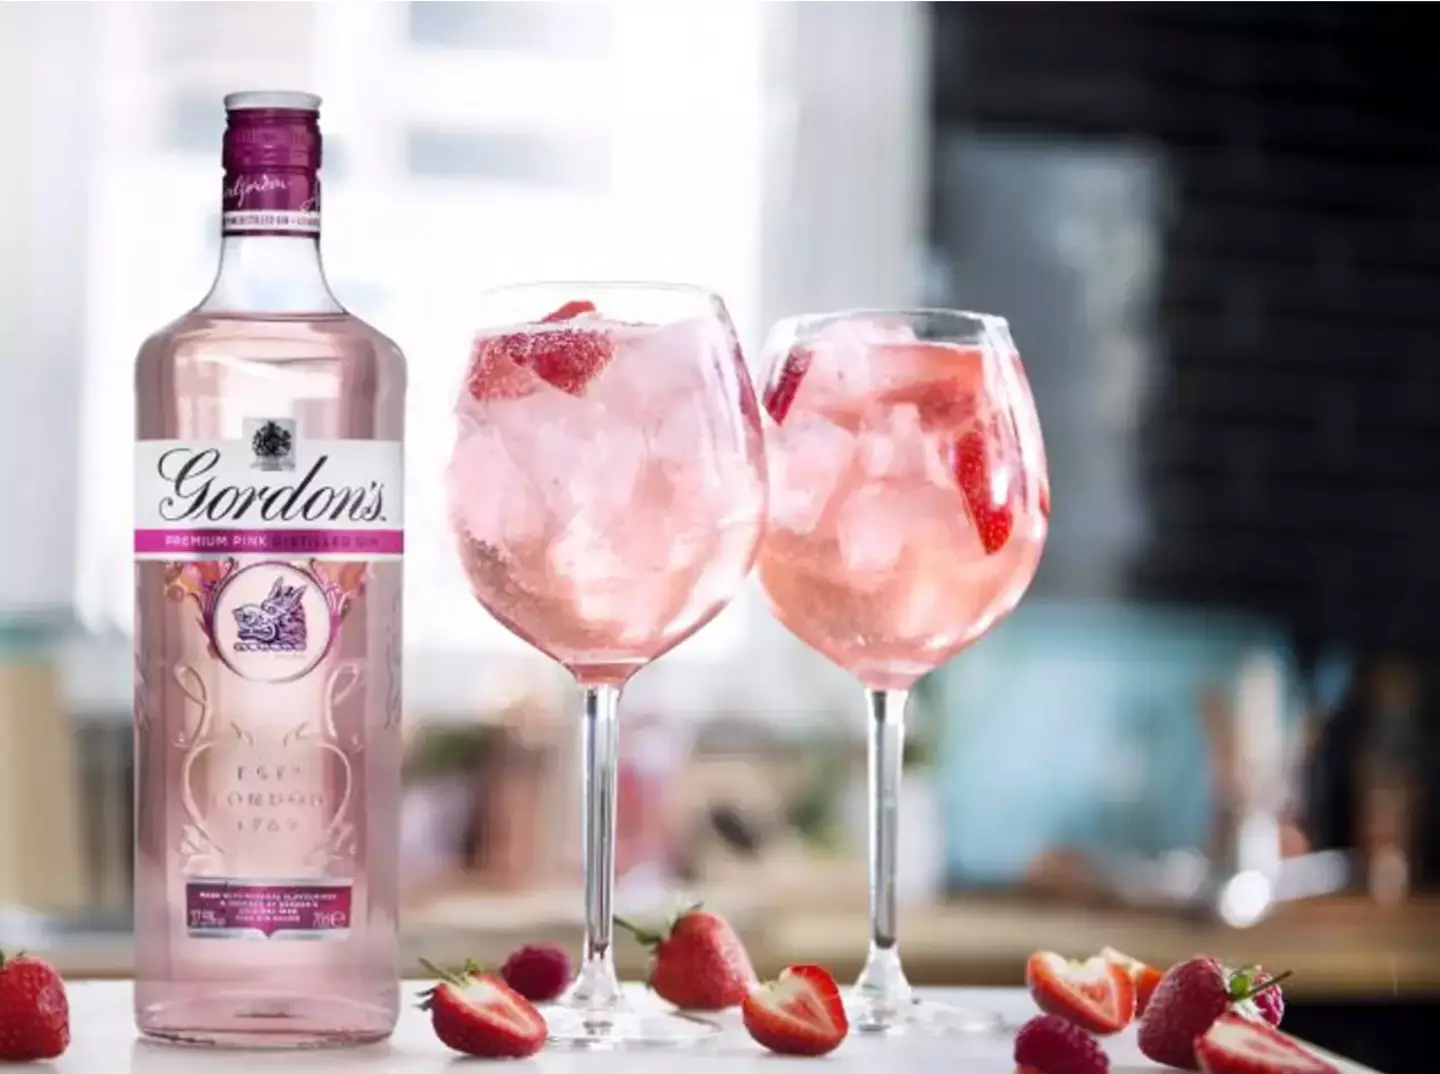 Gordon's launched their premium pink gin in 2017 (